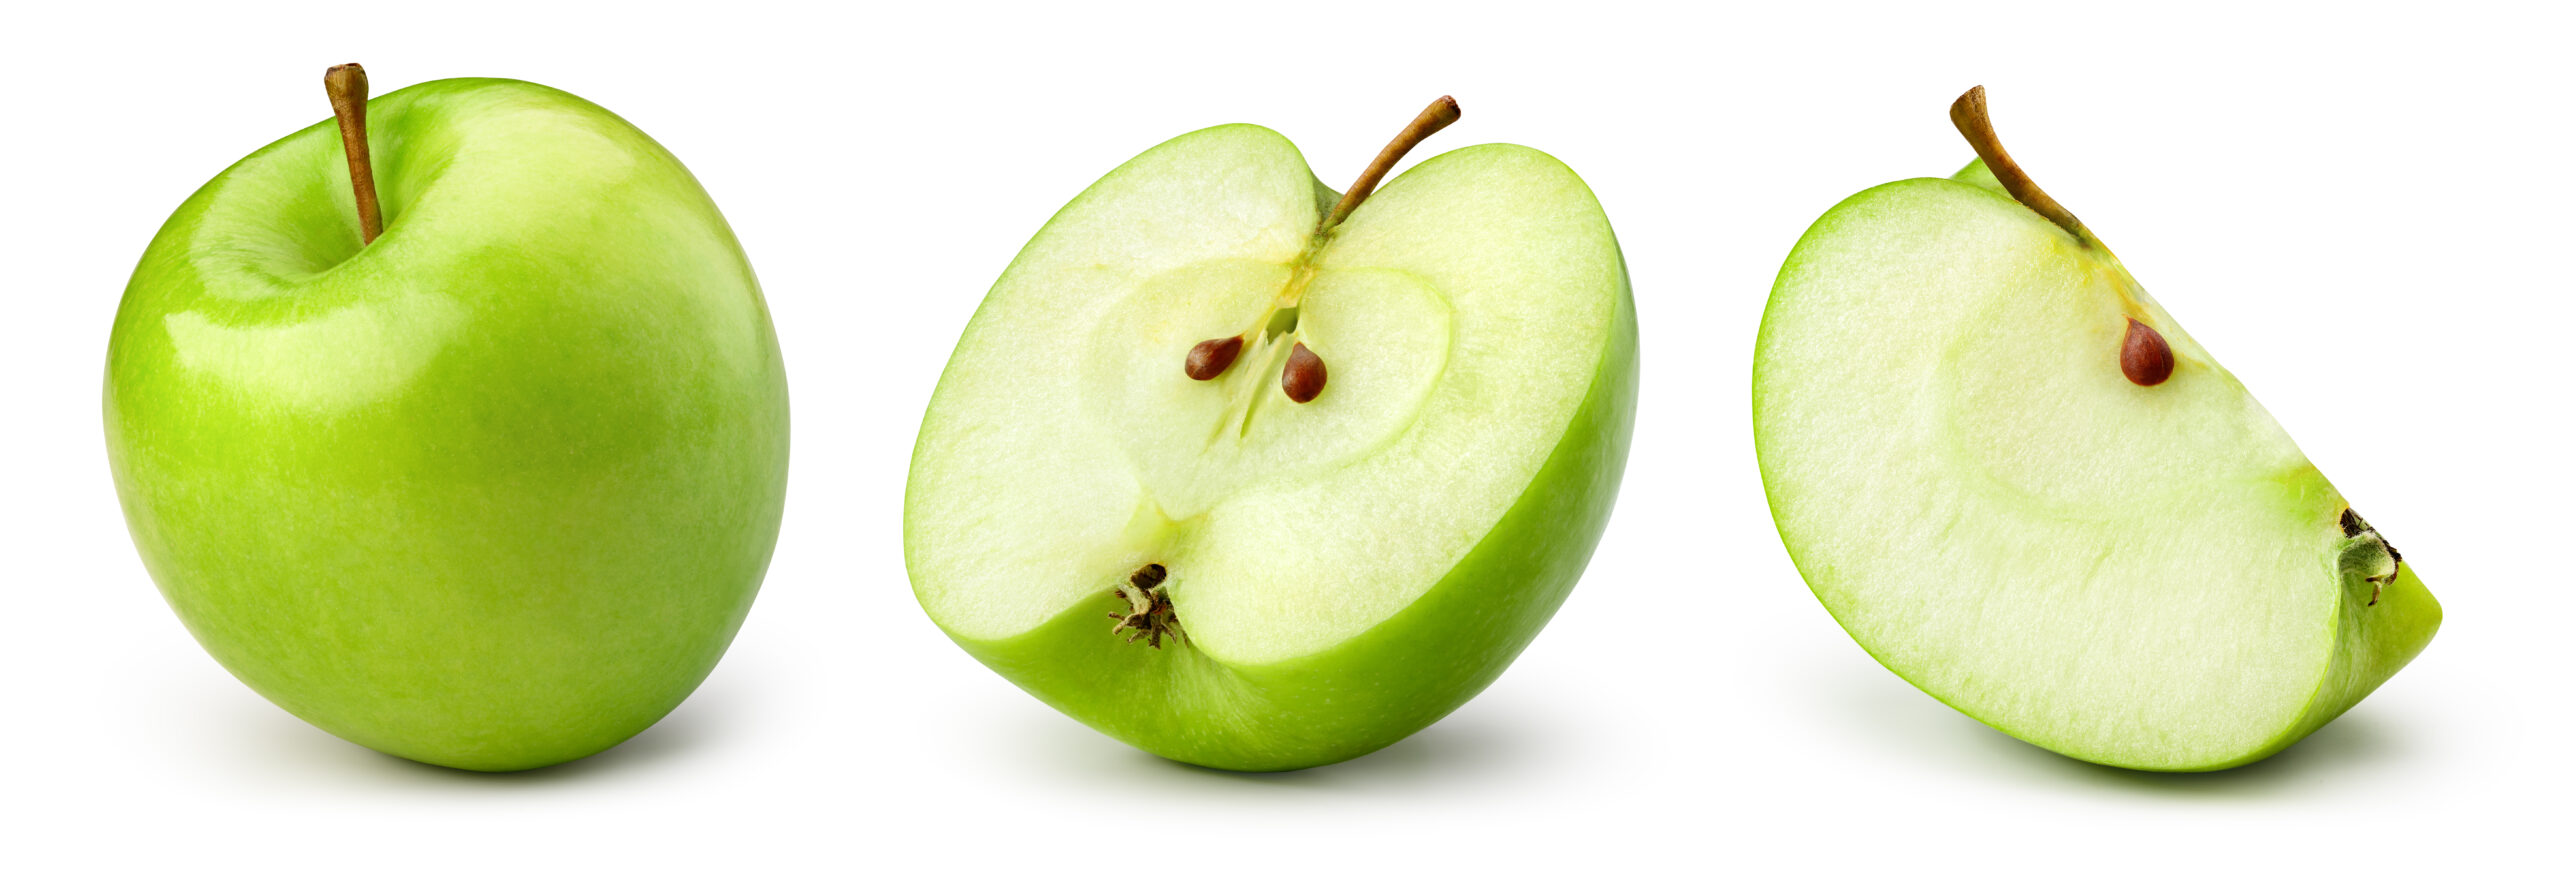 Green,Apple,Isolate.,Apples,On,White,Background.,Whole,,Half,,Slice